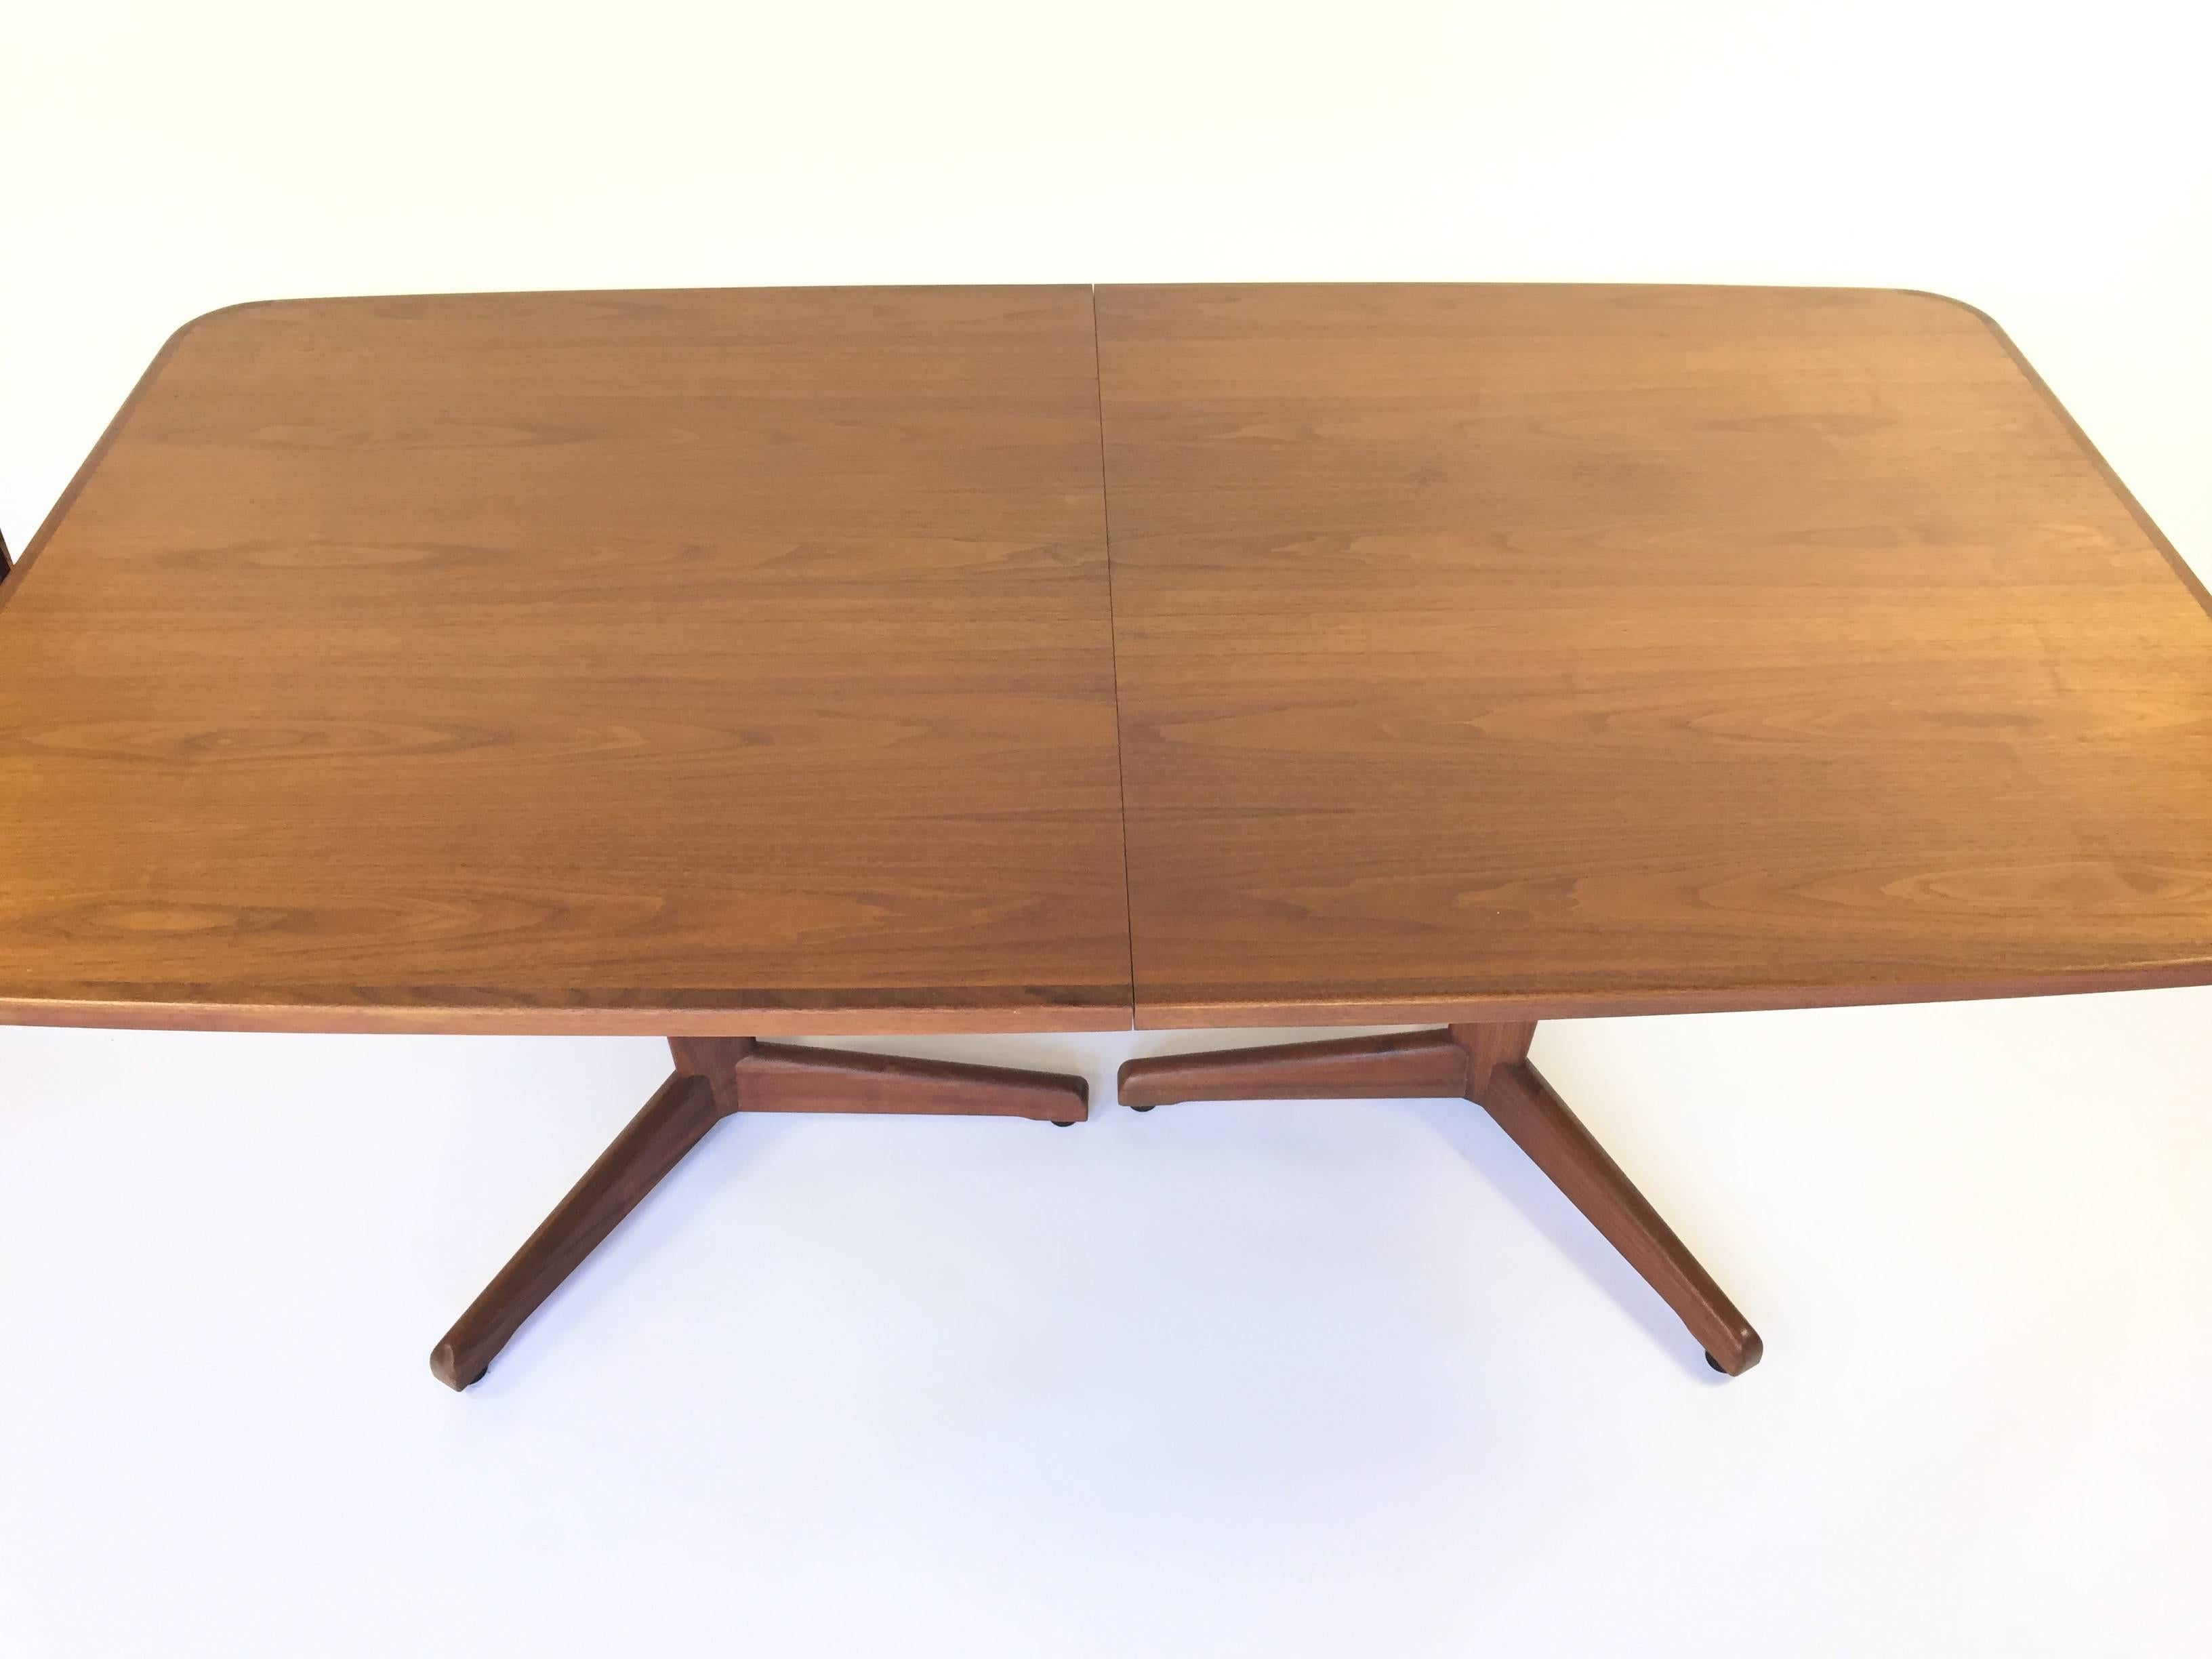 Incredible Mid-Century walnut dining table by John Keal for Brown Saltman. Features tapered legs with unique tripod feet. Includes two leaves of 20